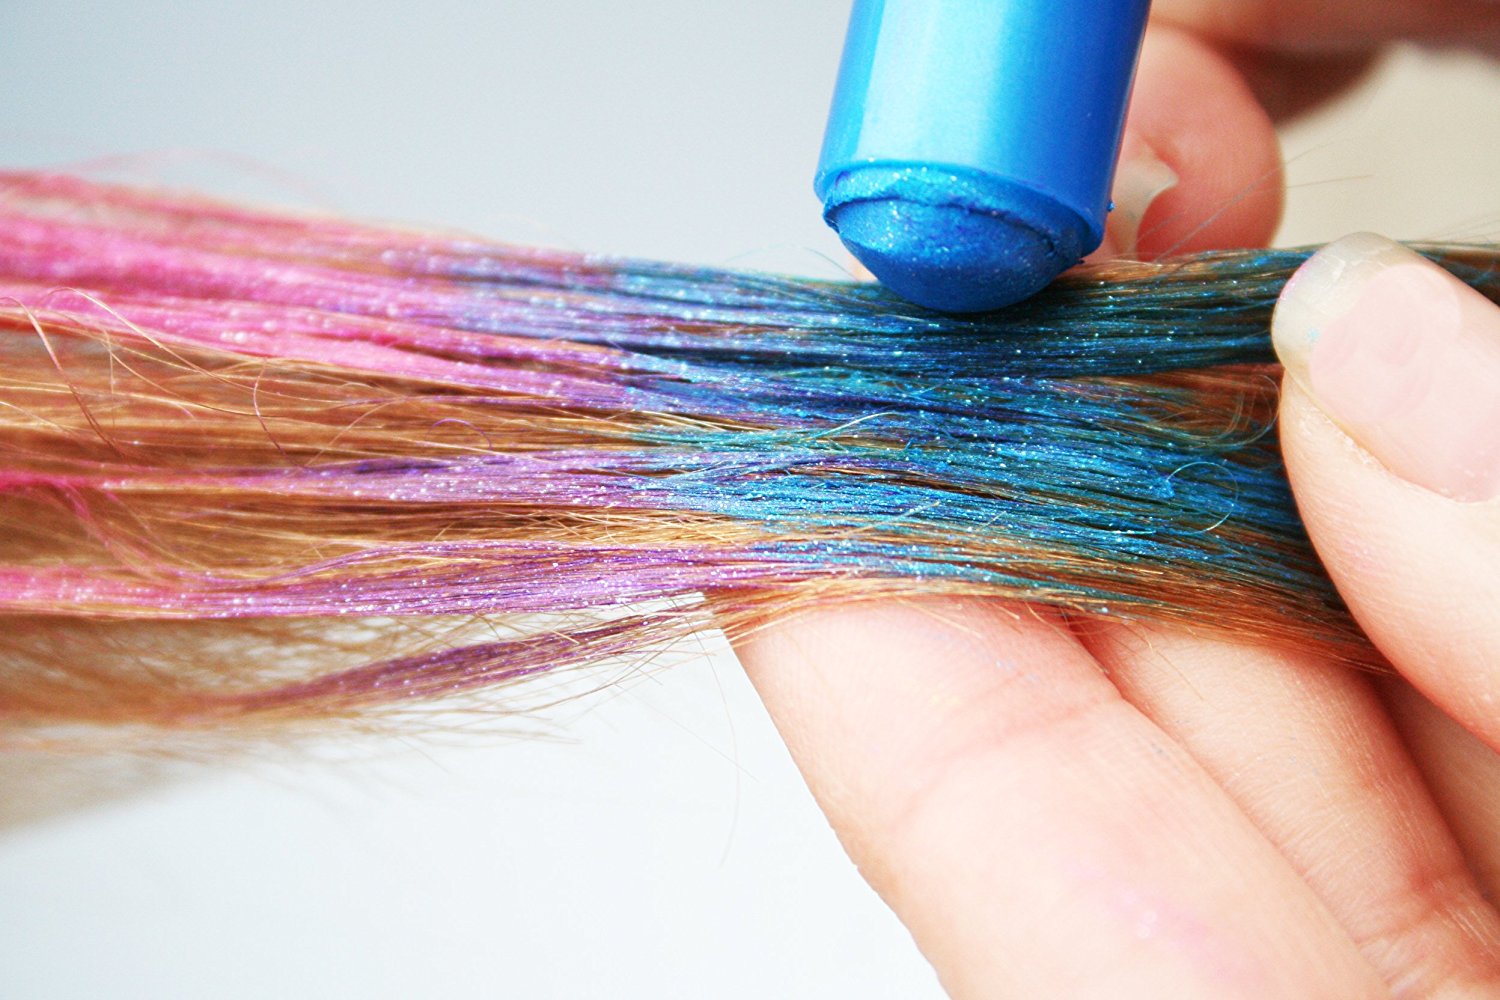 7. "Hair Chalk for Kids - 10 Temporary Hair Color Dye Chalks for Girls, Teens, and Adults - Washable Hair Dye for Halloween, Cosplay, and Parties - Includes Black, Brown, Blonde, and More" - wide 1